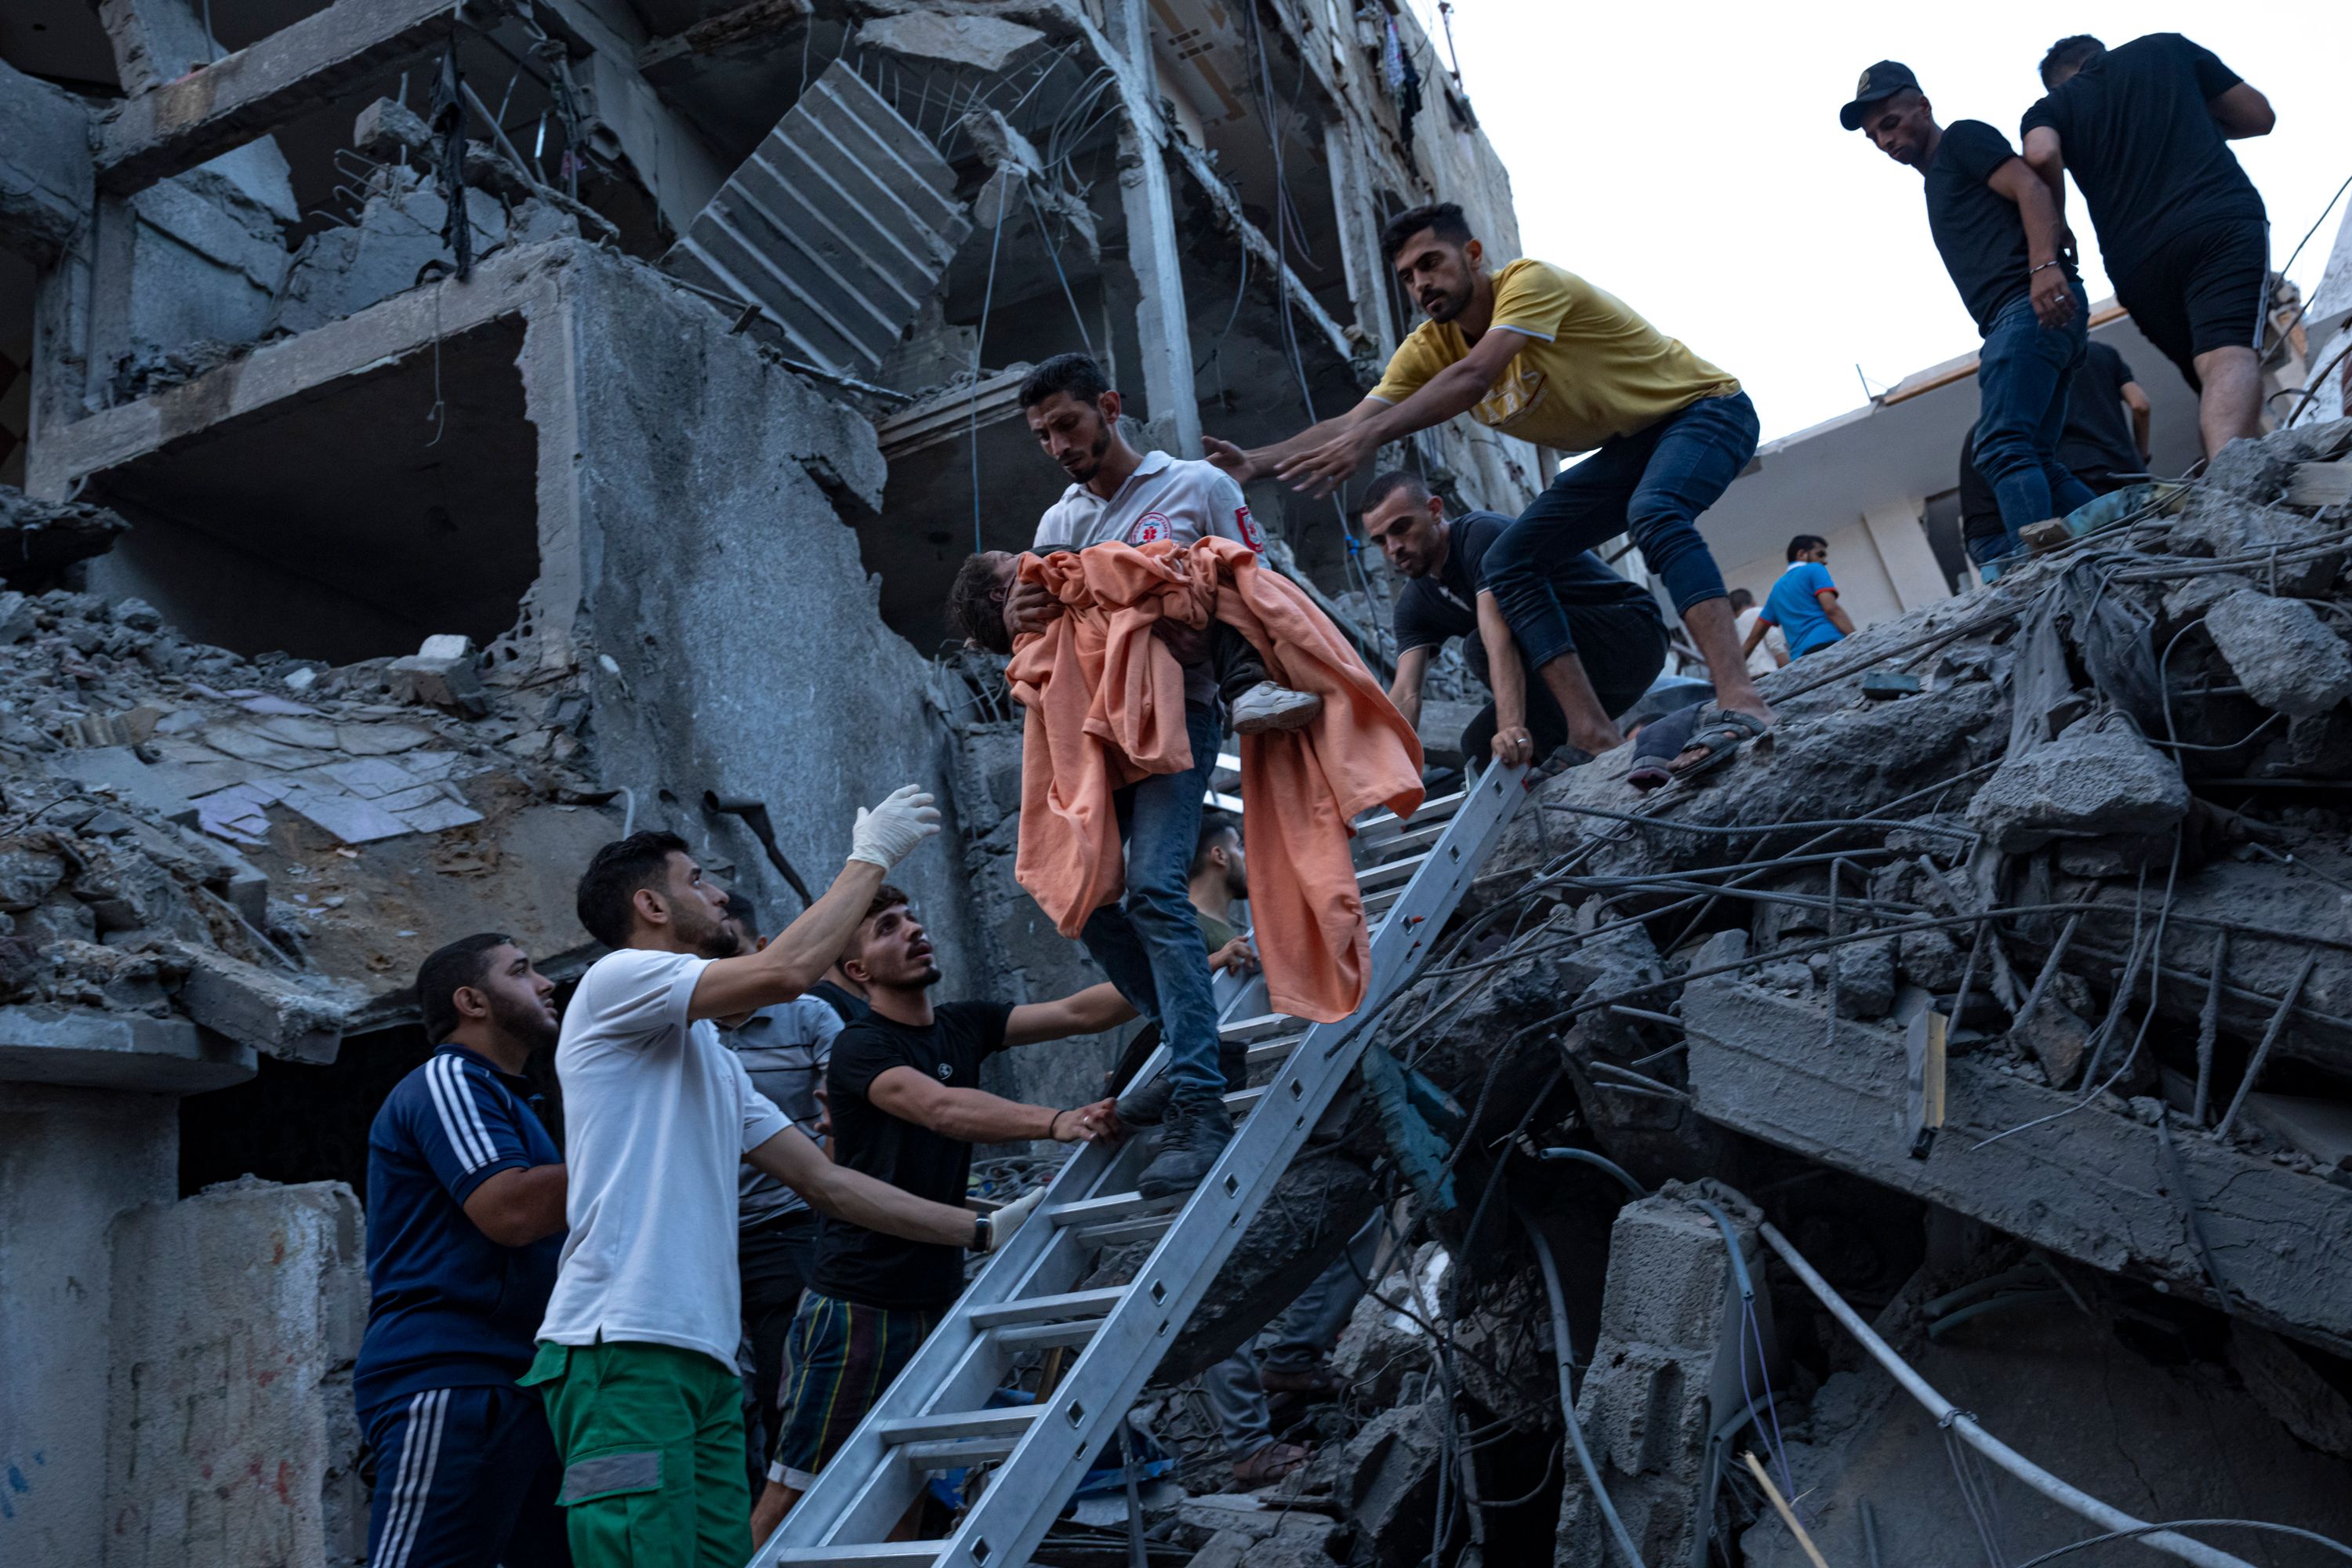 Palestinians rescue a young girl from the rubble of a destroyed residential building following an Israeli airstrike on October 10.